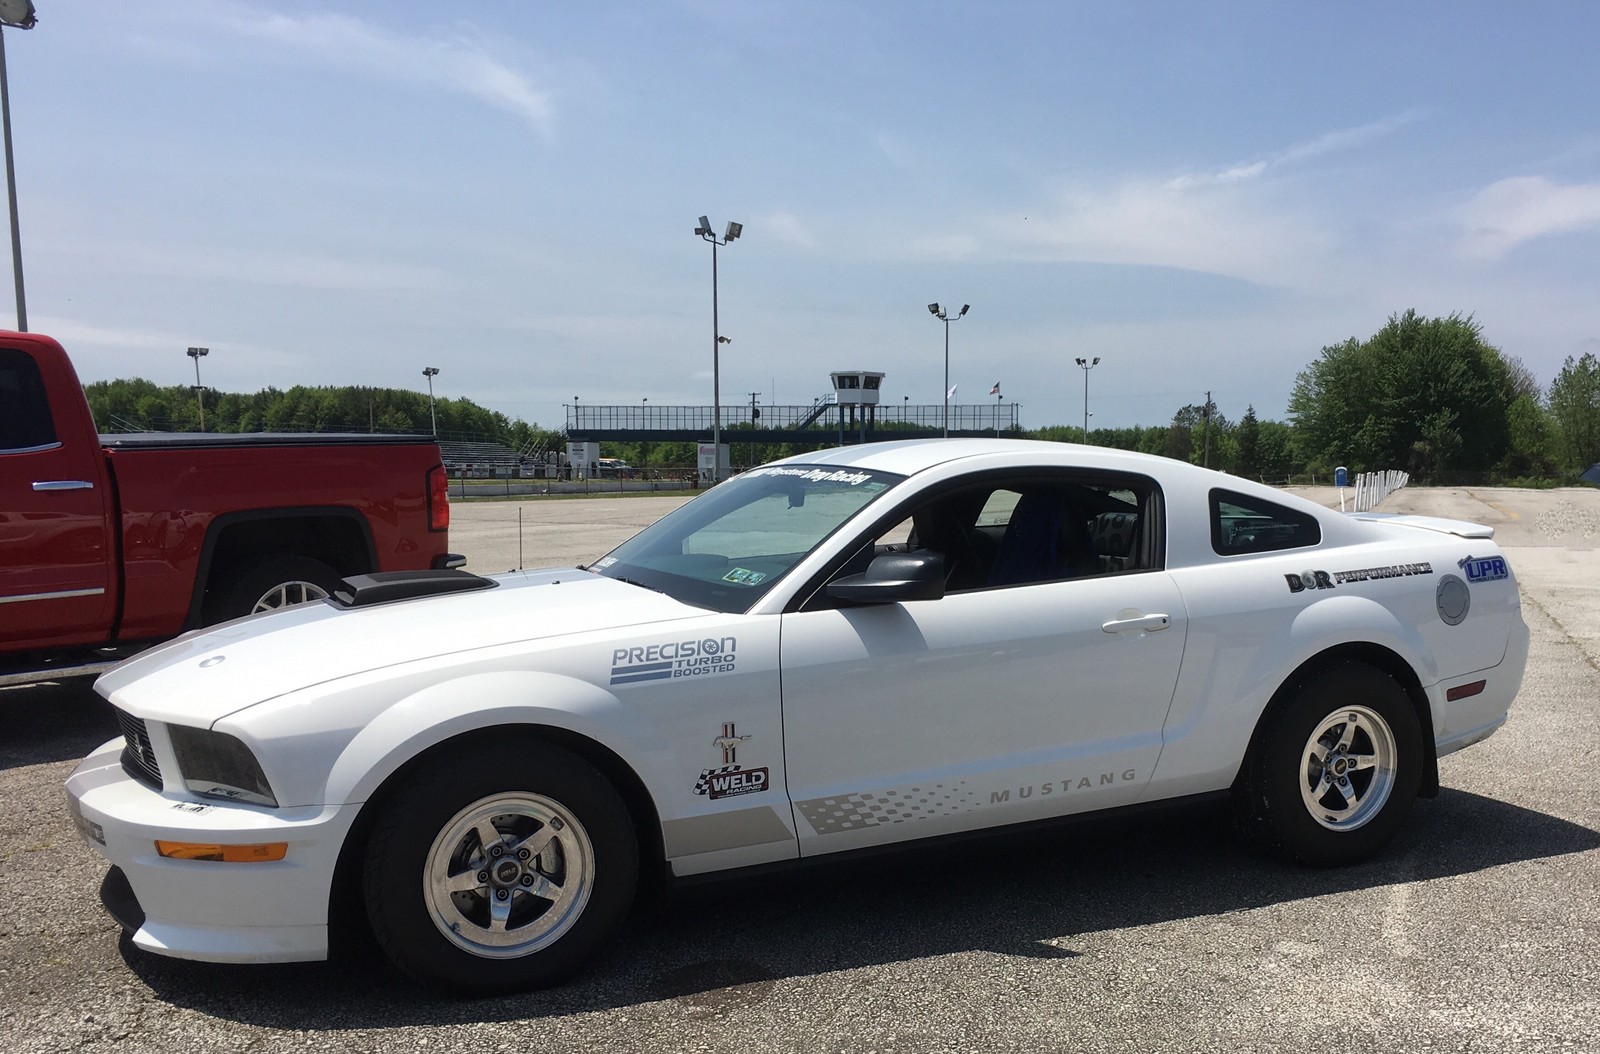 2007 Performance White Ford Mustang 4.0L 61mm Precision Turbocharger picture, mods, upgrades